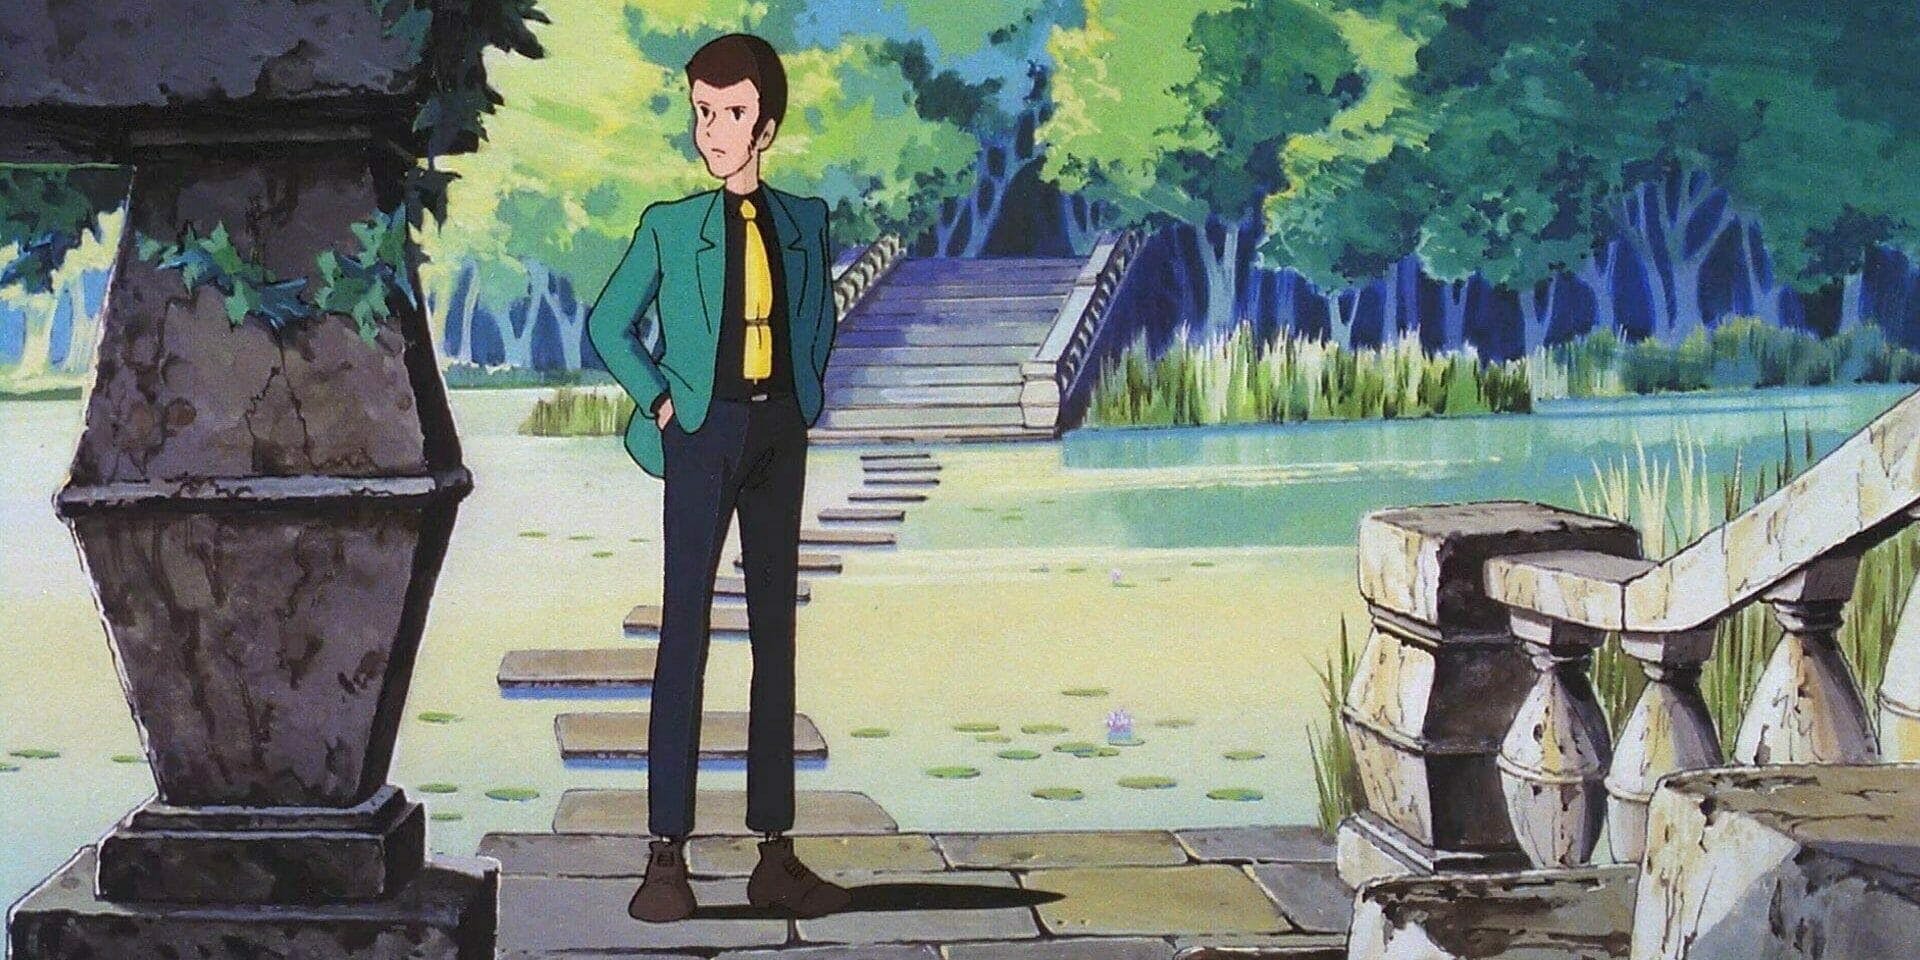 anime movies on netflix - castle of cagliostro